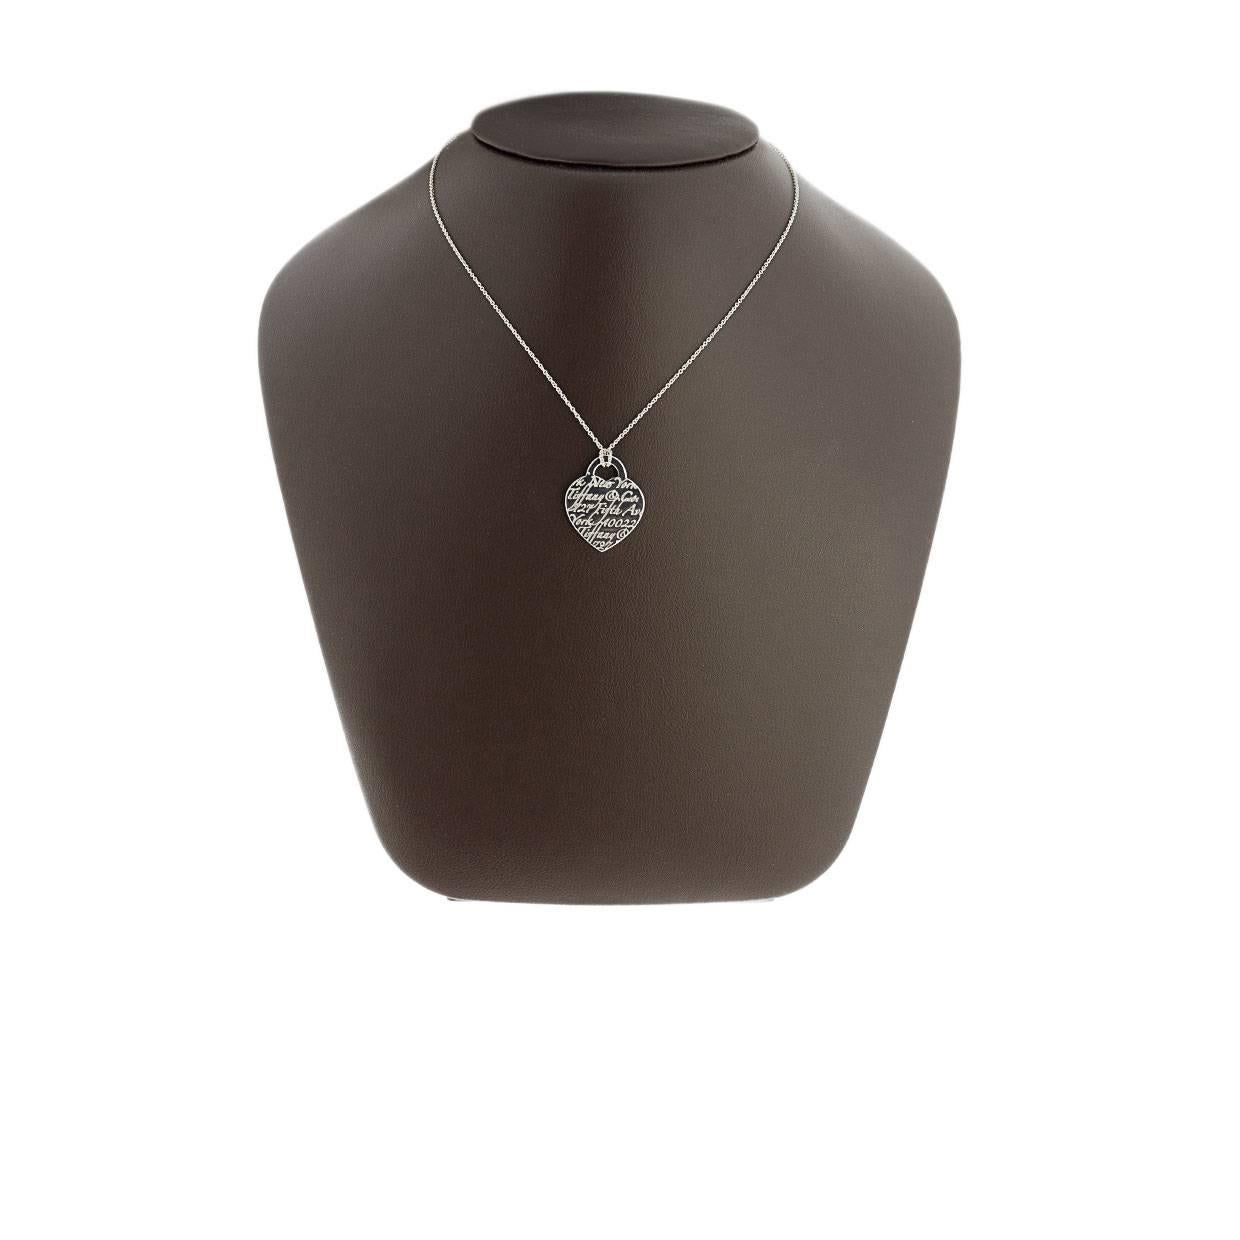 Tiffany & Co. have long been revered for their spectacular original designs that are coveted around the world. This stunning Tiffany pendant is no exception! It's from the Fifth Ave. collection, which celebrates Tiffany's flagship store on Fifth Ave